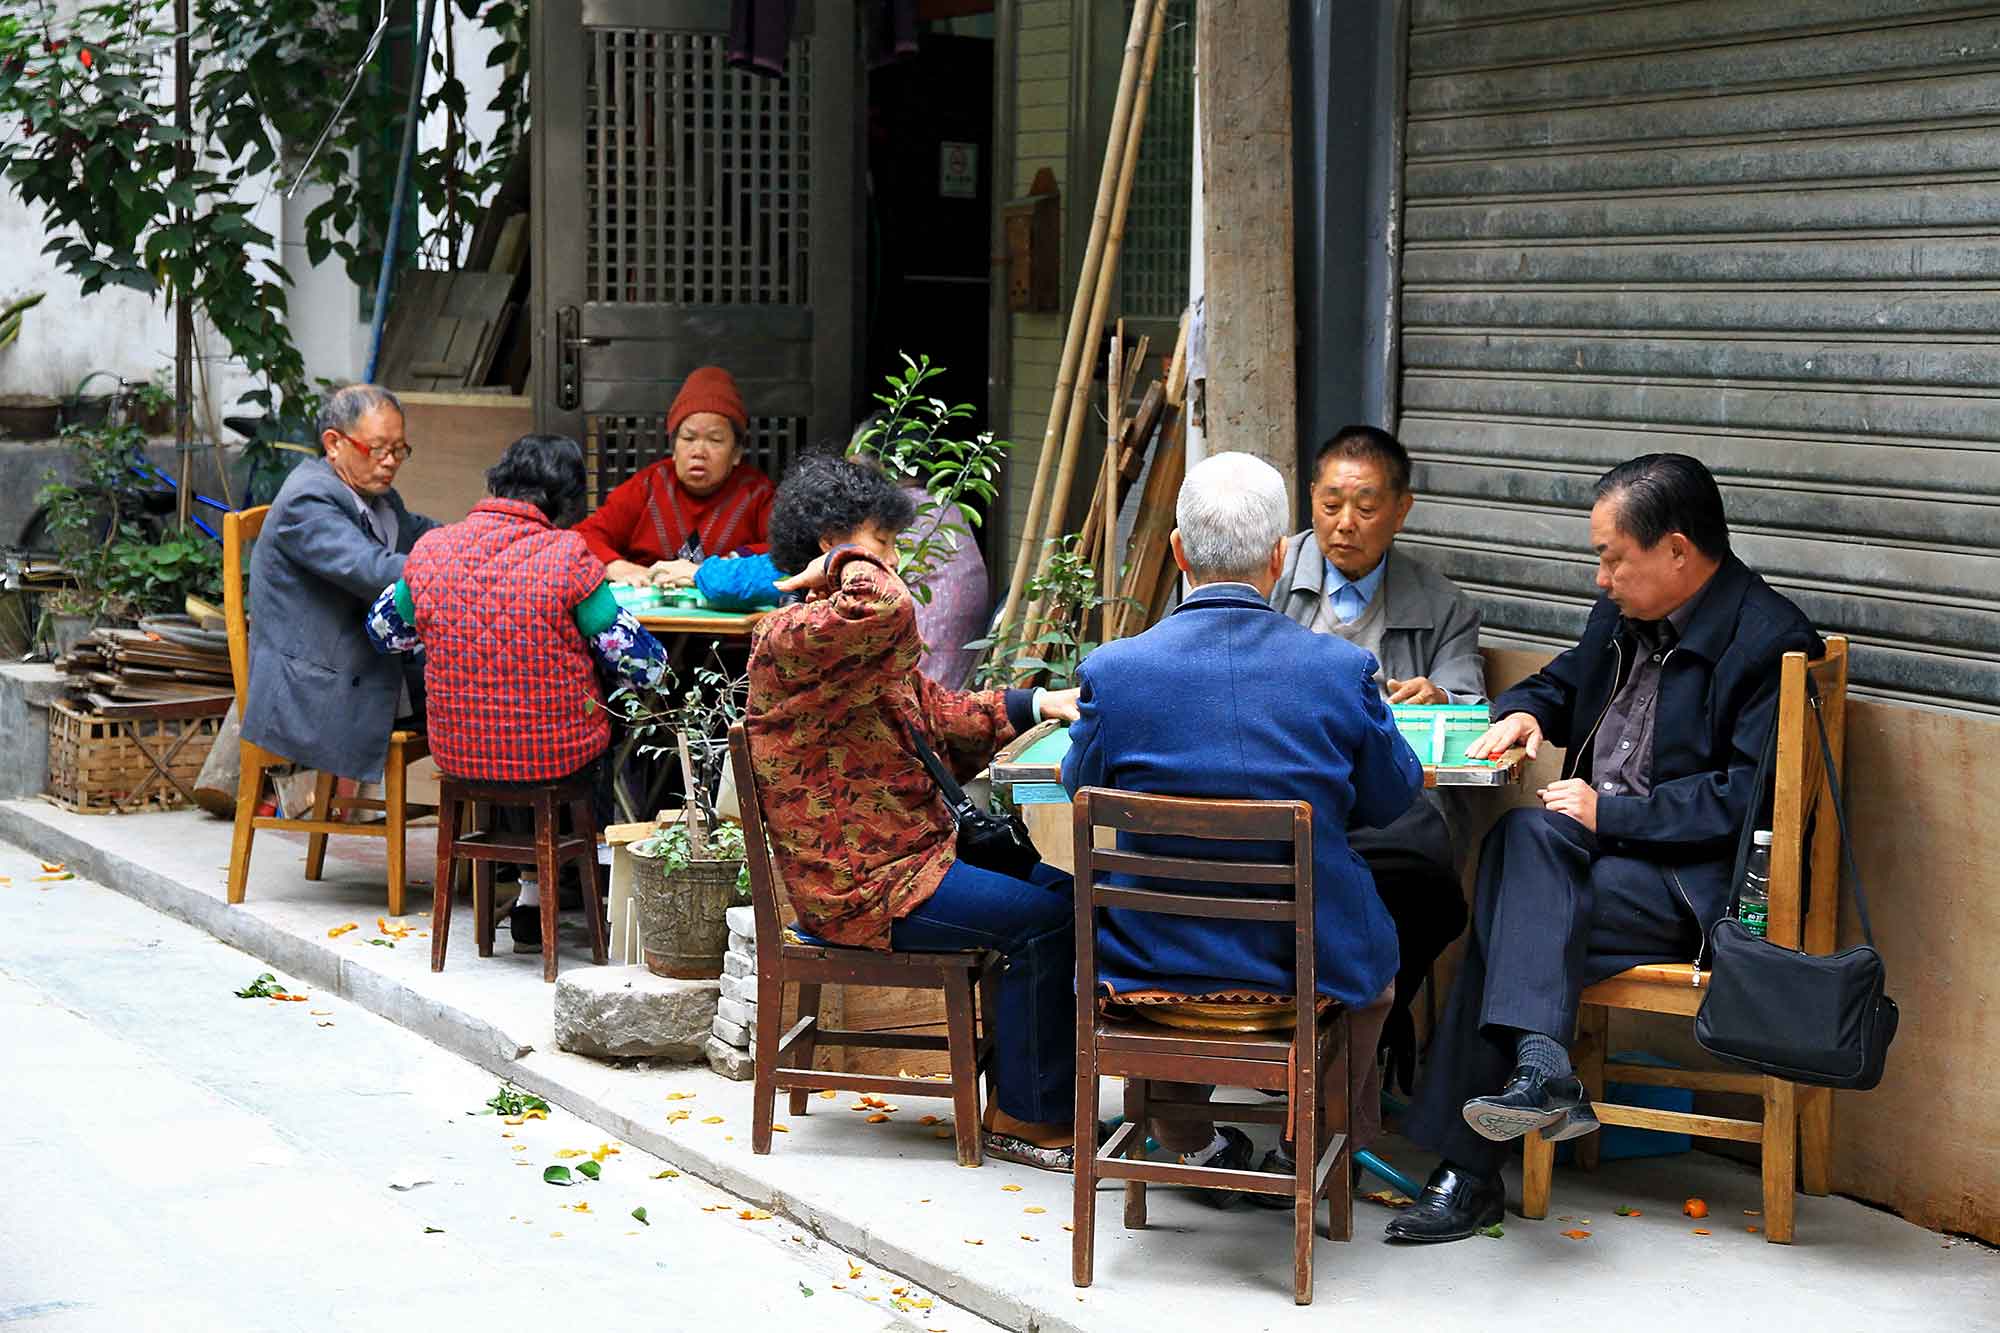 Playing a game of Mahjong in the streets of Guangzhou, China. © Ulli Maier & Nisa Maier